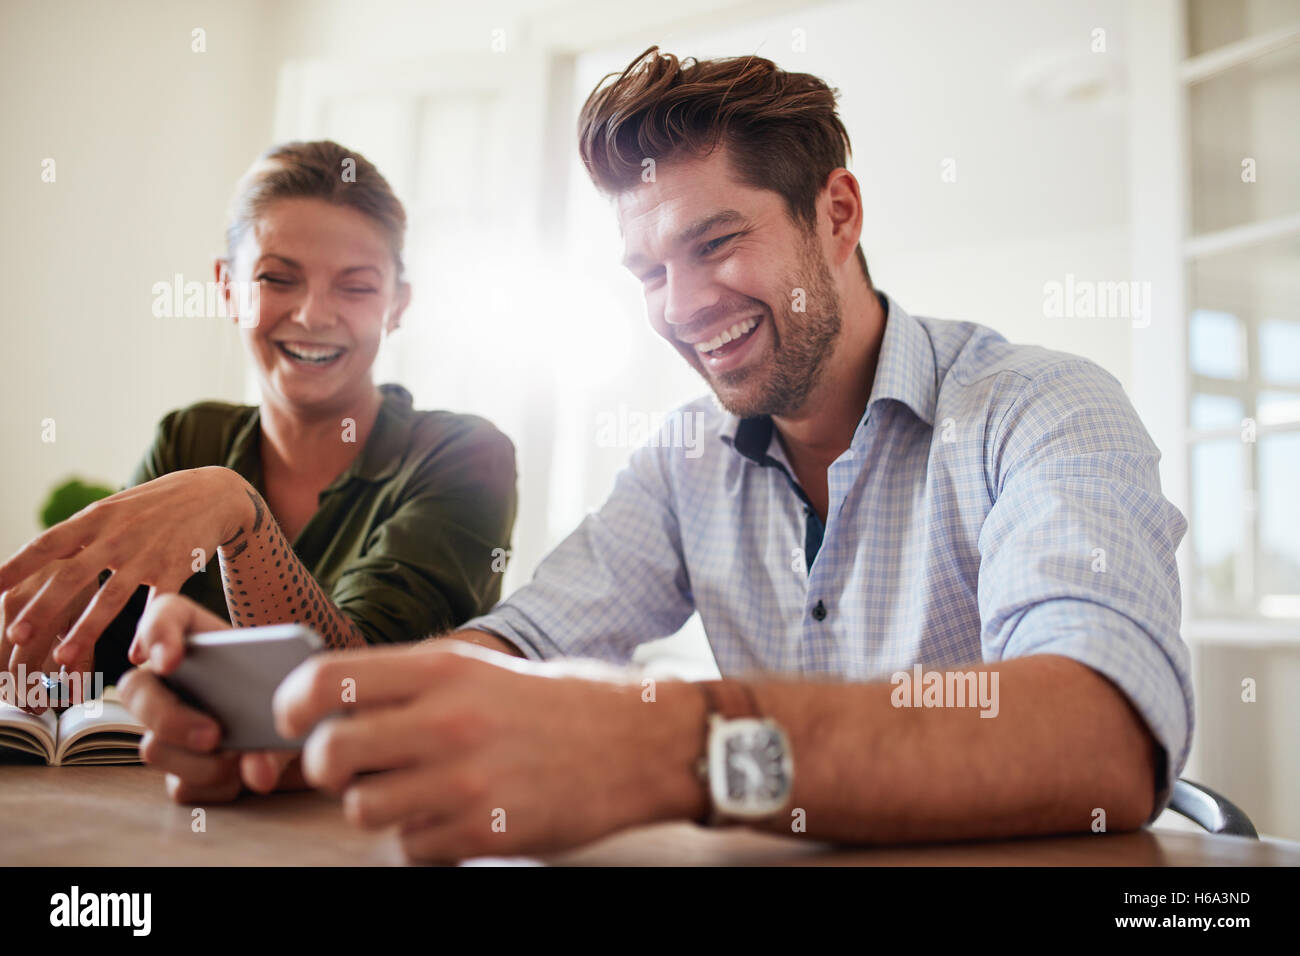 Shot of young couple sitting at table using cellphone at home and smiling. Man and woman smiling with mobile phone. Stock Photo